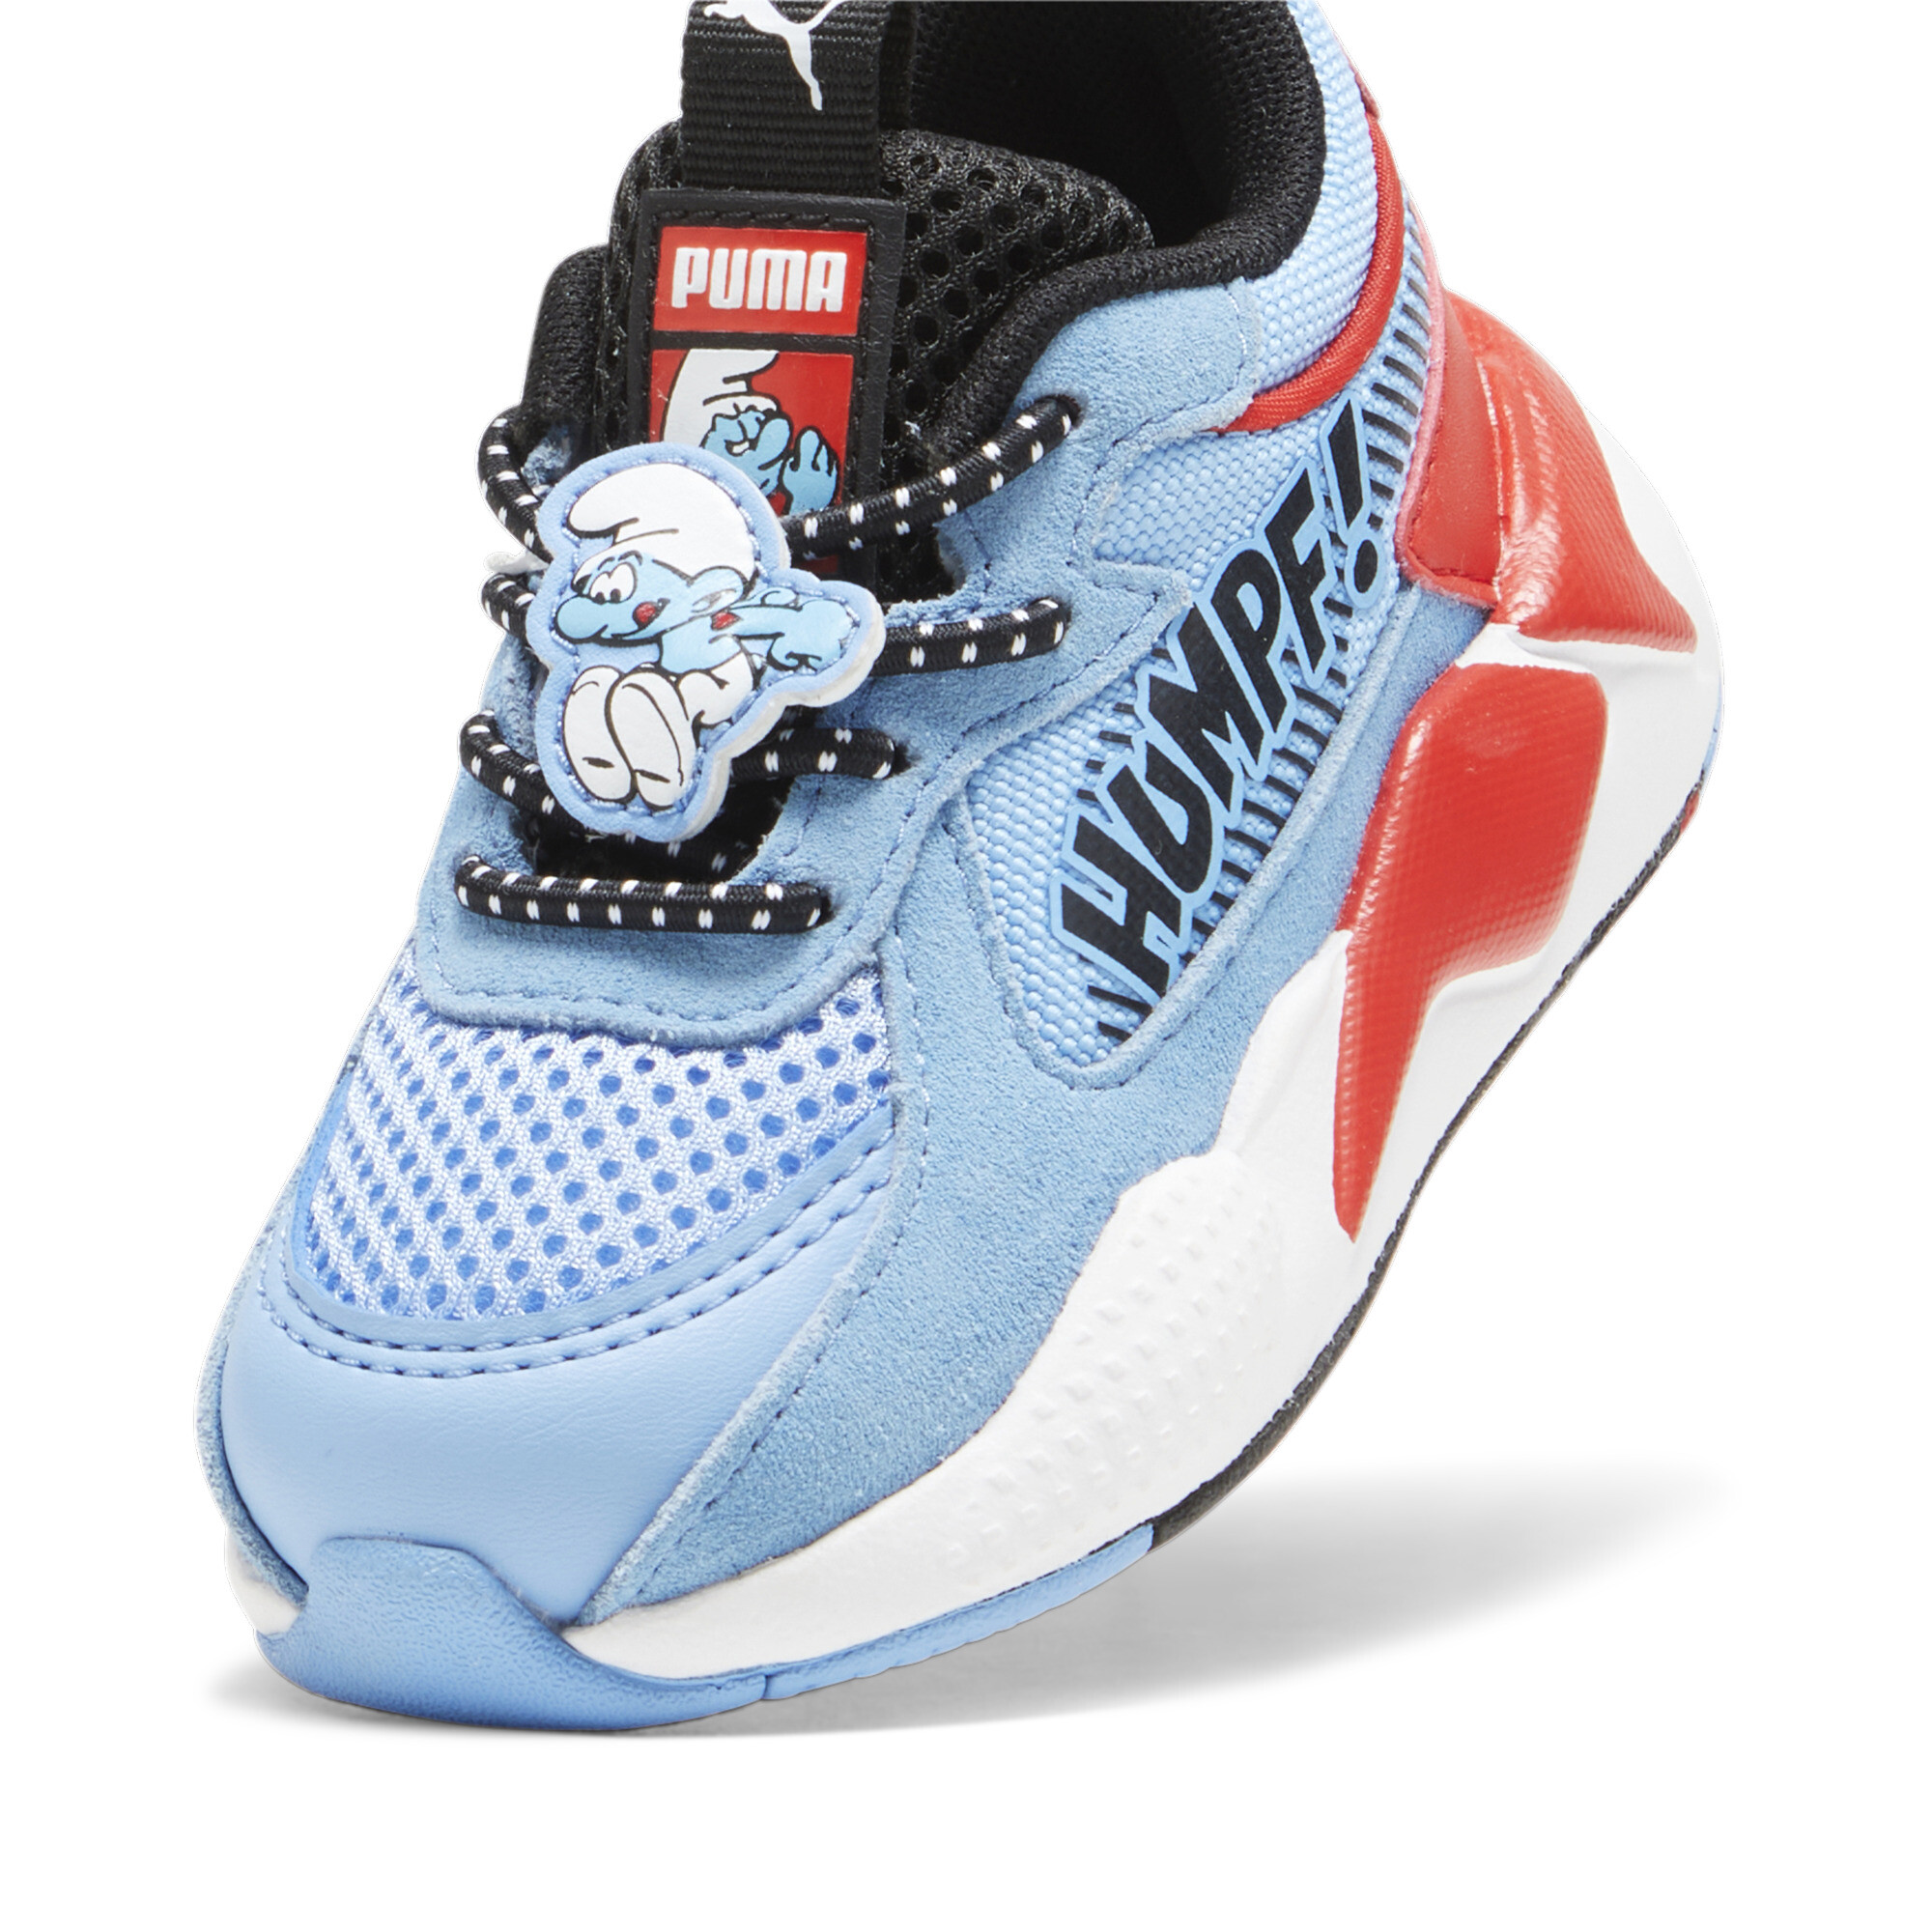 Kids' PUMA X THE SMURFS RS-X Toddlers' Sneakers In Blue, Size EU 27